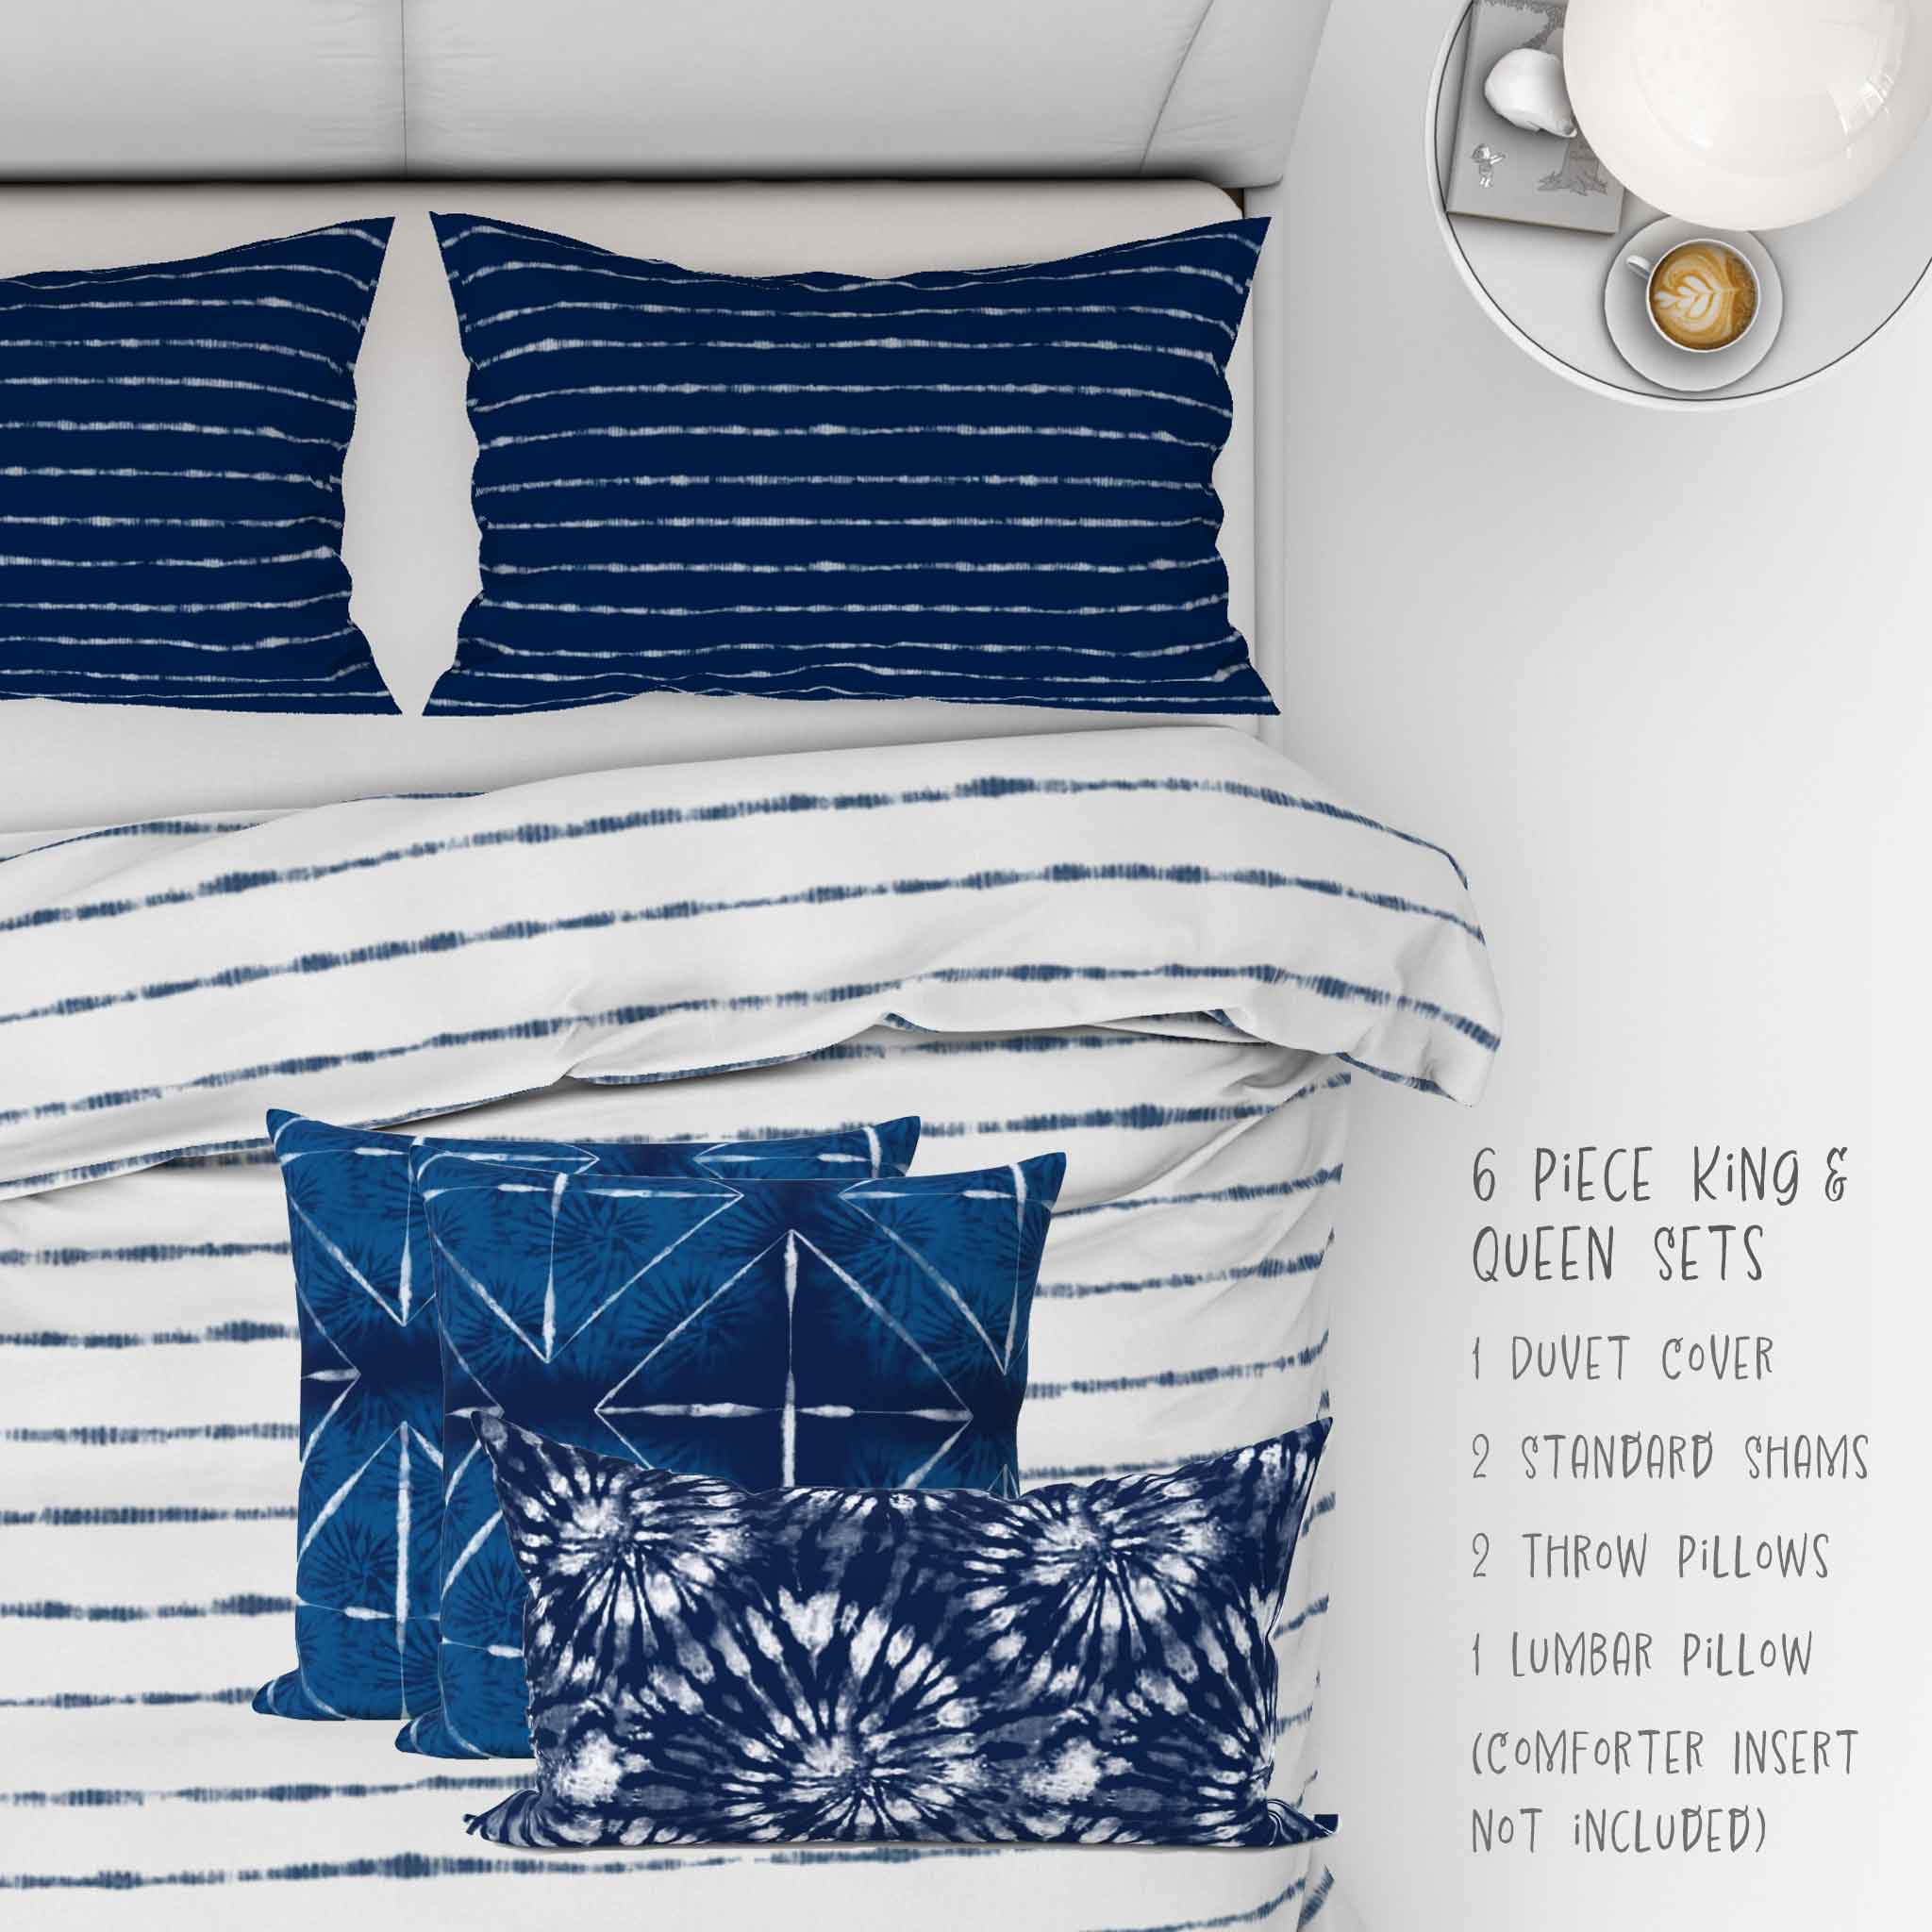 Shibori Indigo Tie Dye White Horizons bedding set. Available in full, queen, king and cal. king sizes. 6 Piece set includes 2 shams, duvet cover, two 18inch throw pillows and one lumbar pillow.